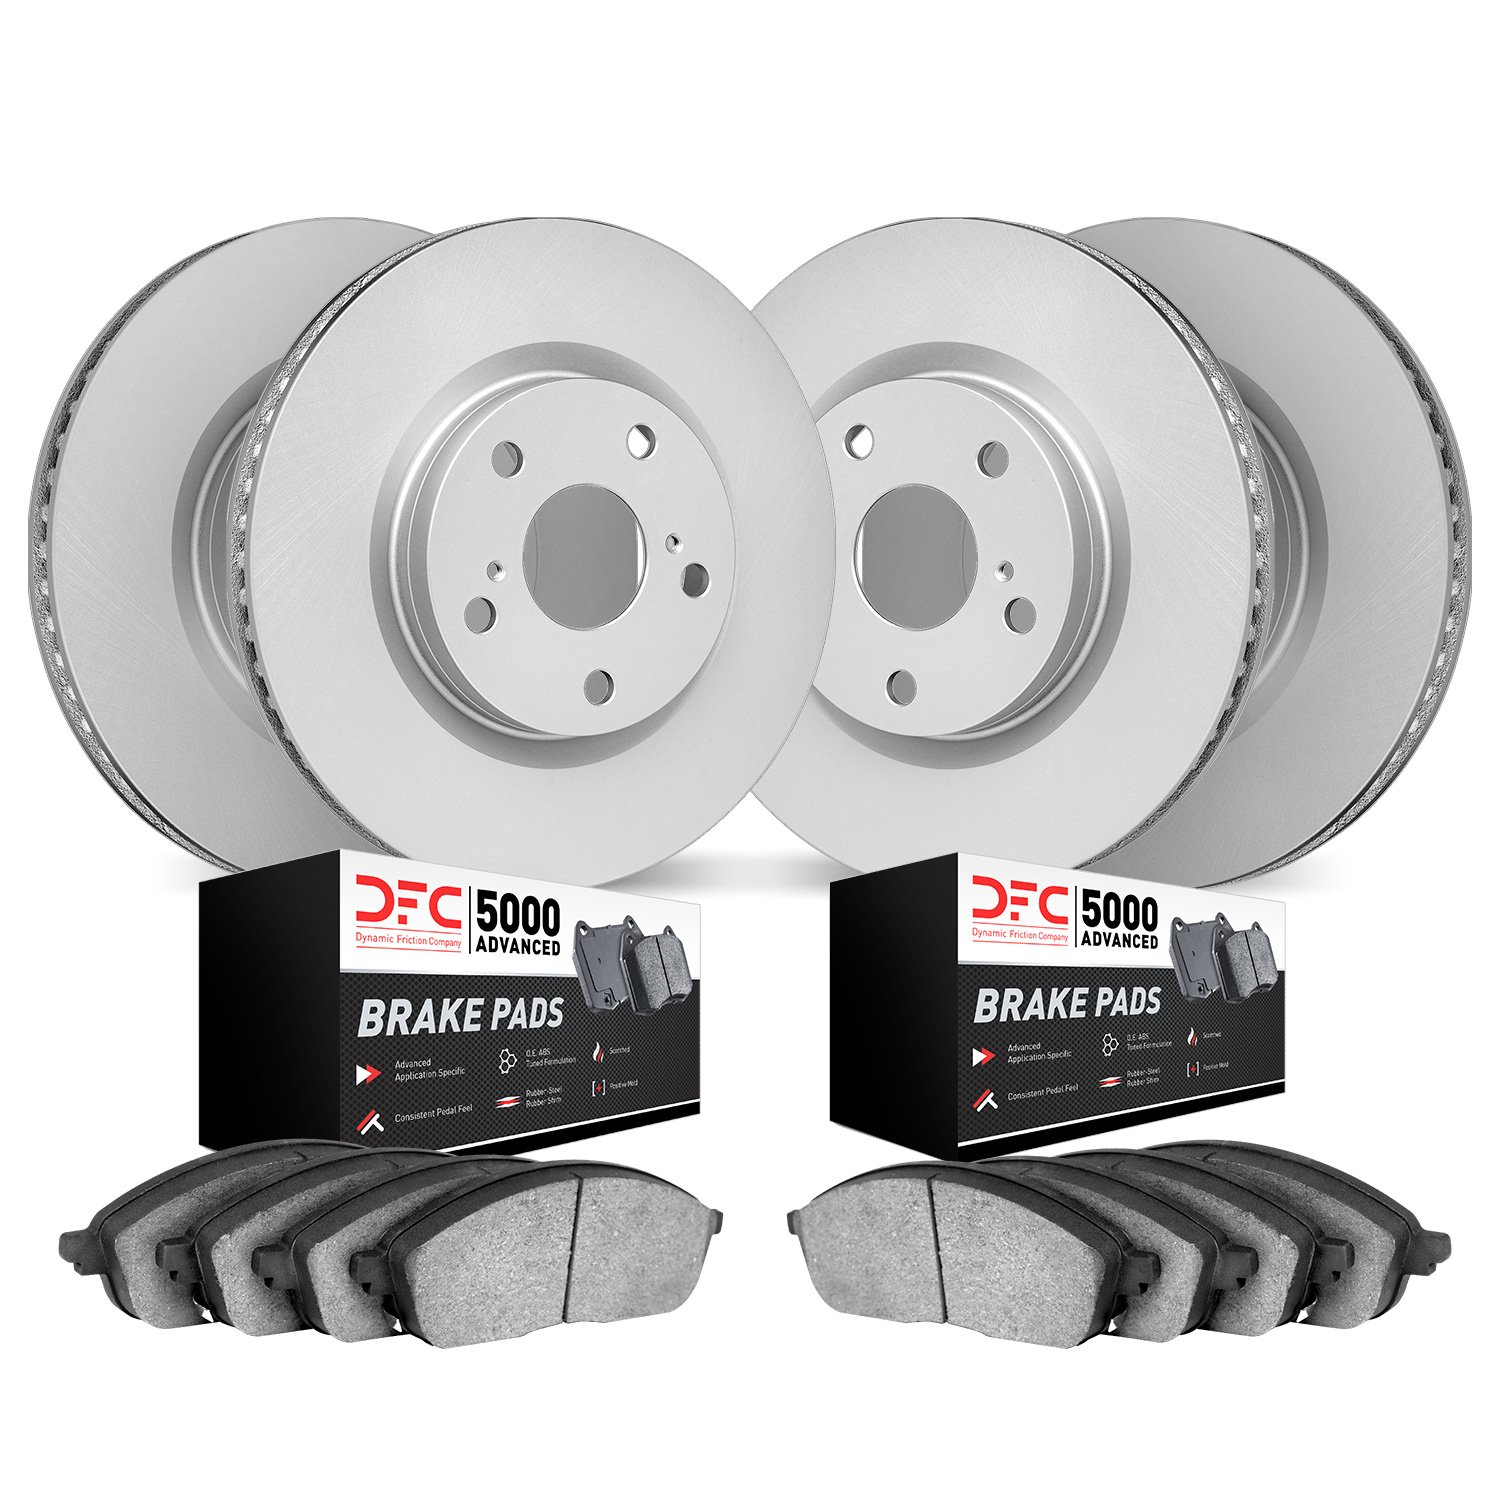 4504-63072 Geospec Brake Rotors w/5000 Advanced Brake Pads Kit, 2010-2016 Mercedes-Benz, Position: Front and Rear